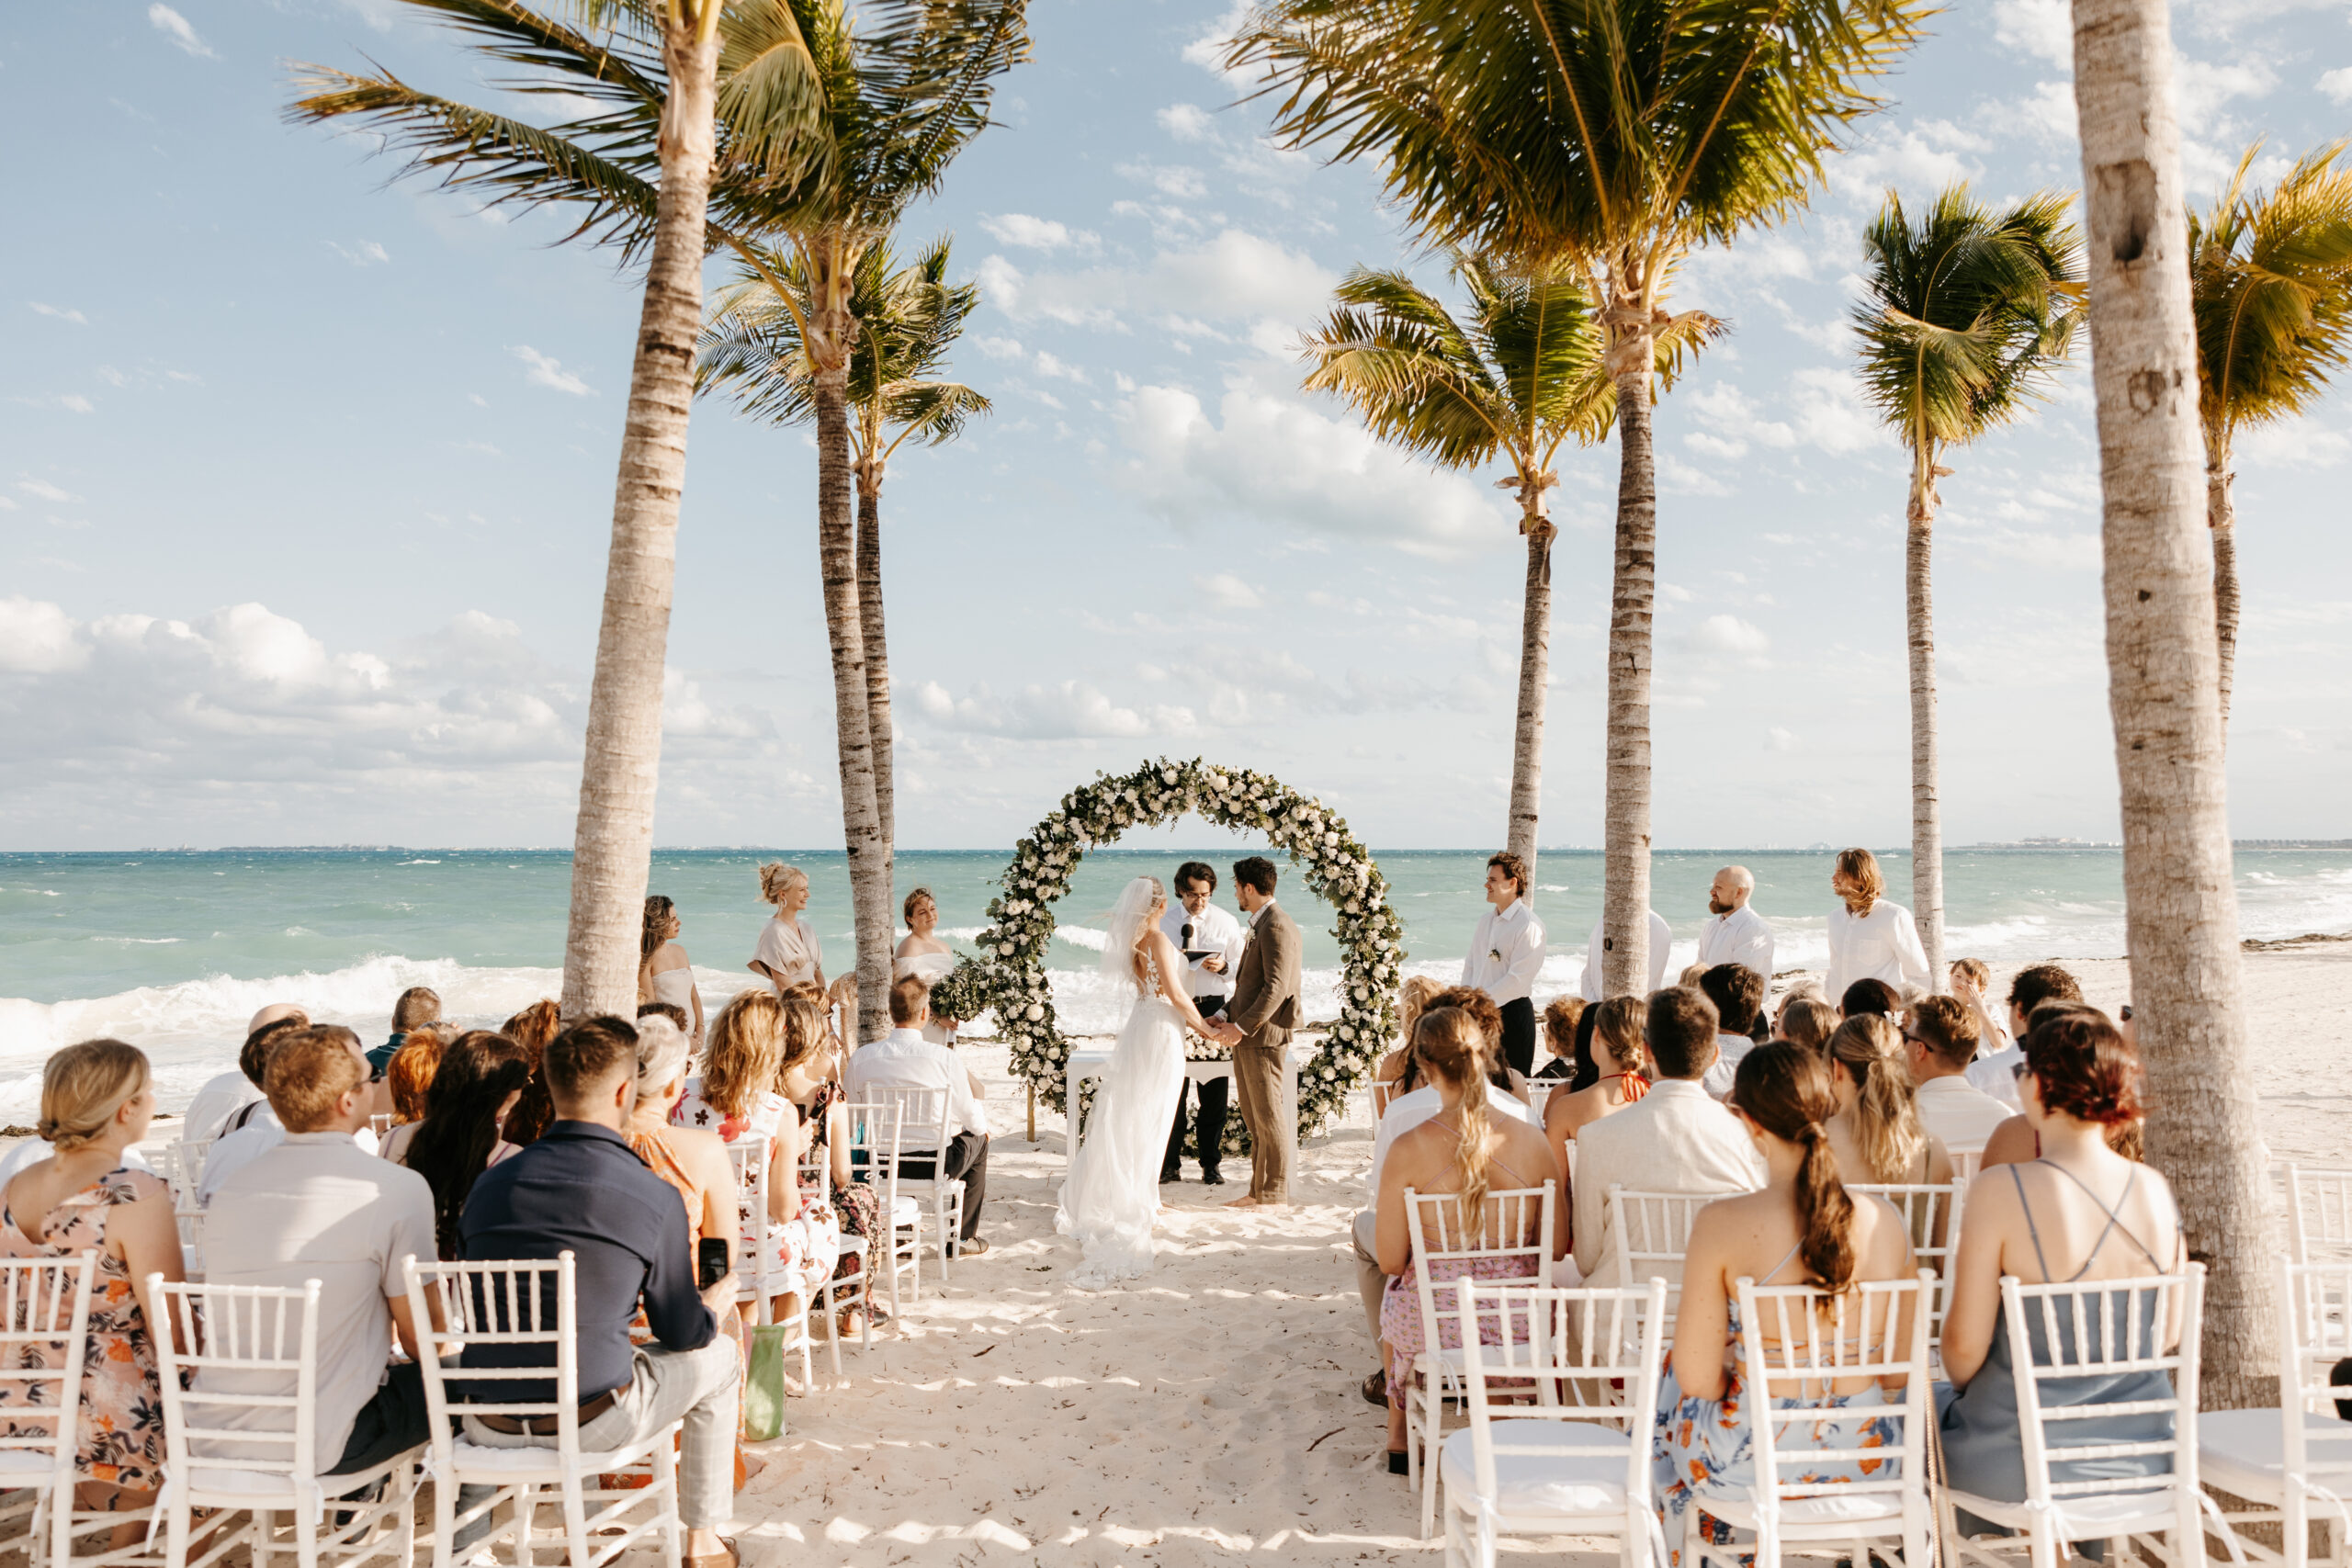 Breathtaking view of the ceremony setup overlooking the turquoise waters of Cancun - Destination wedding backdrop